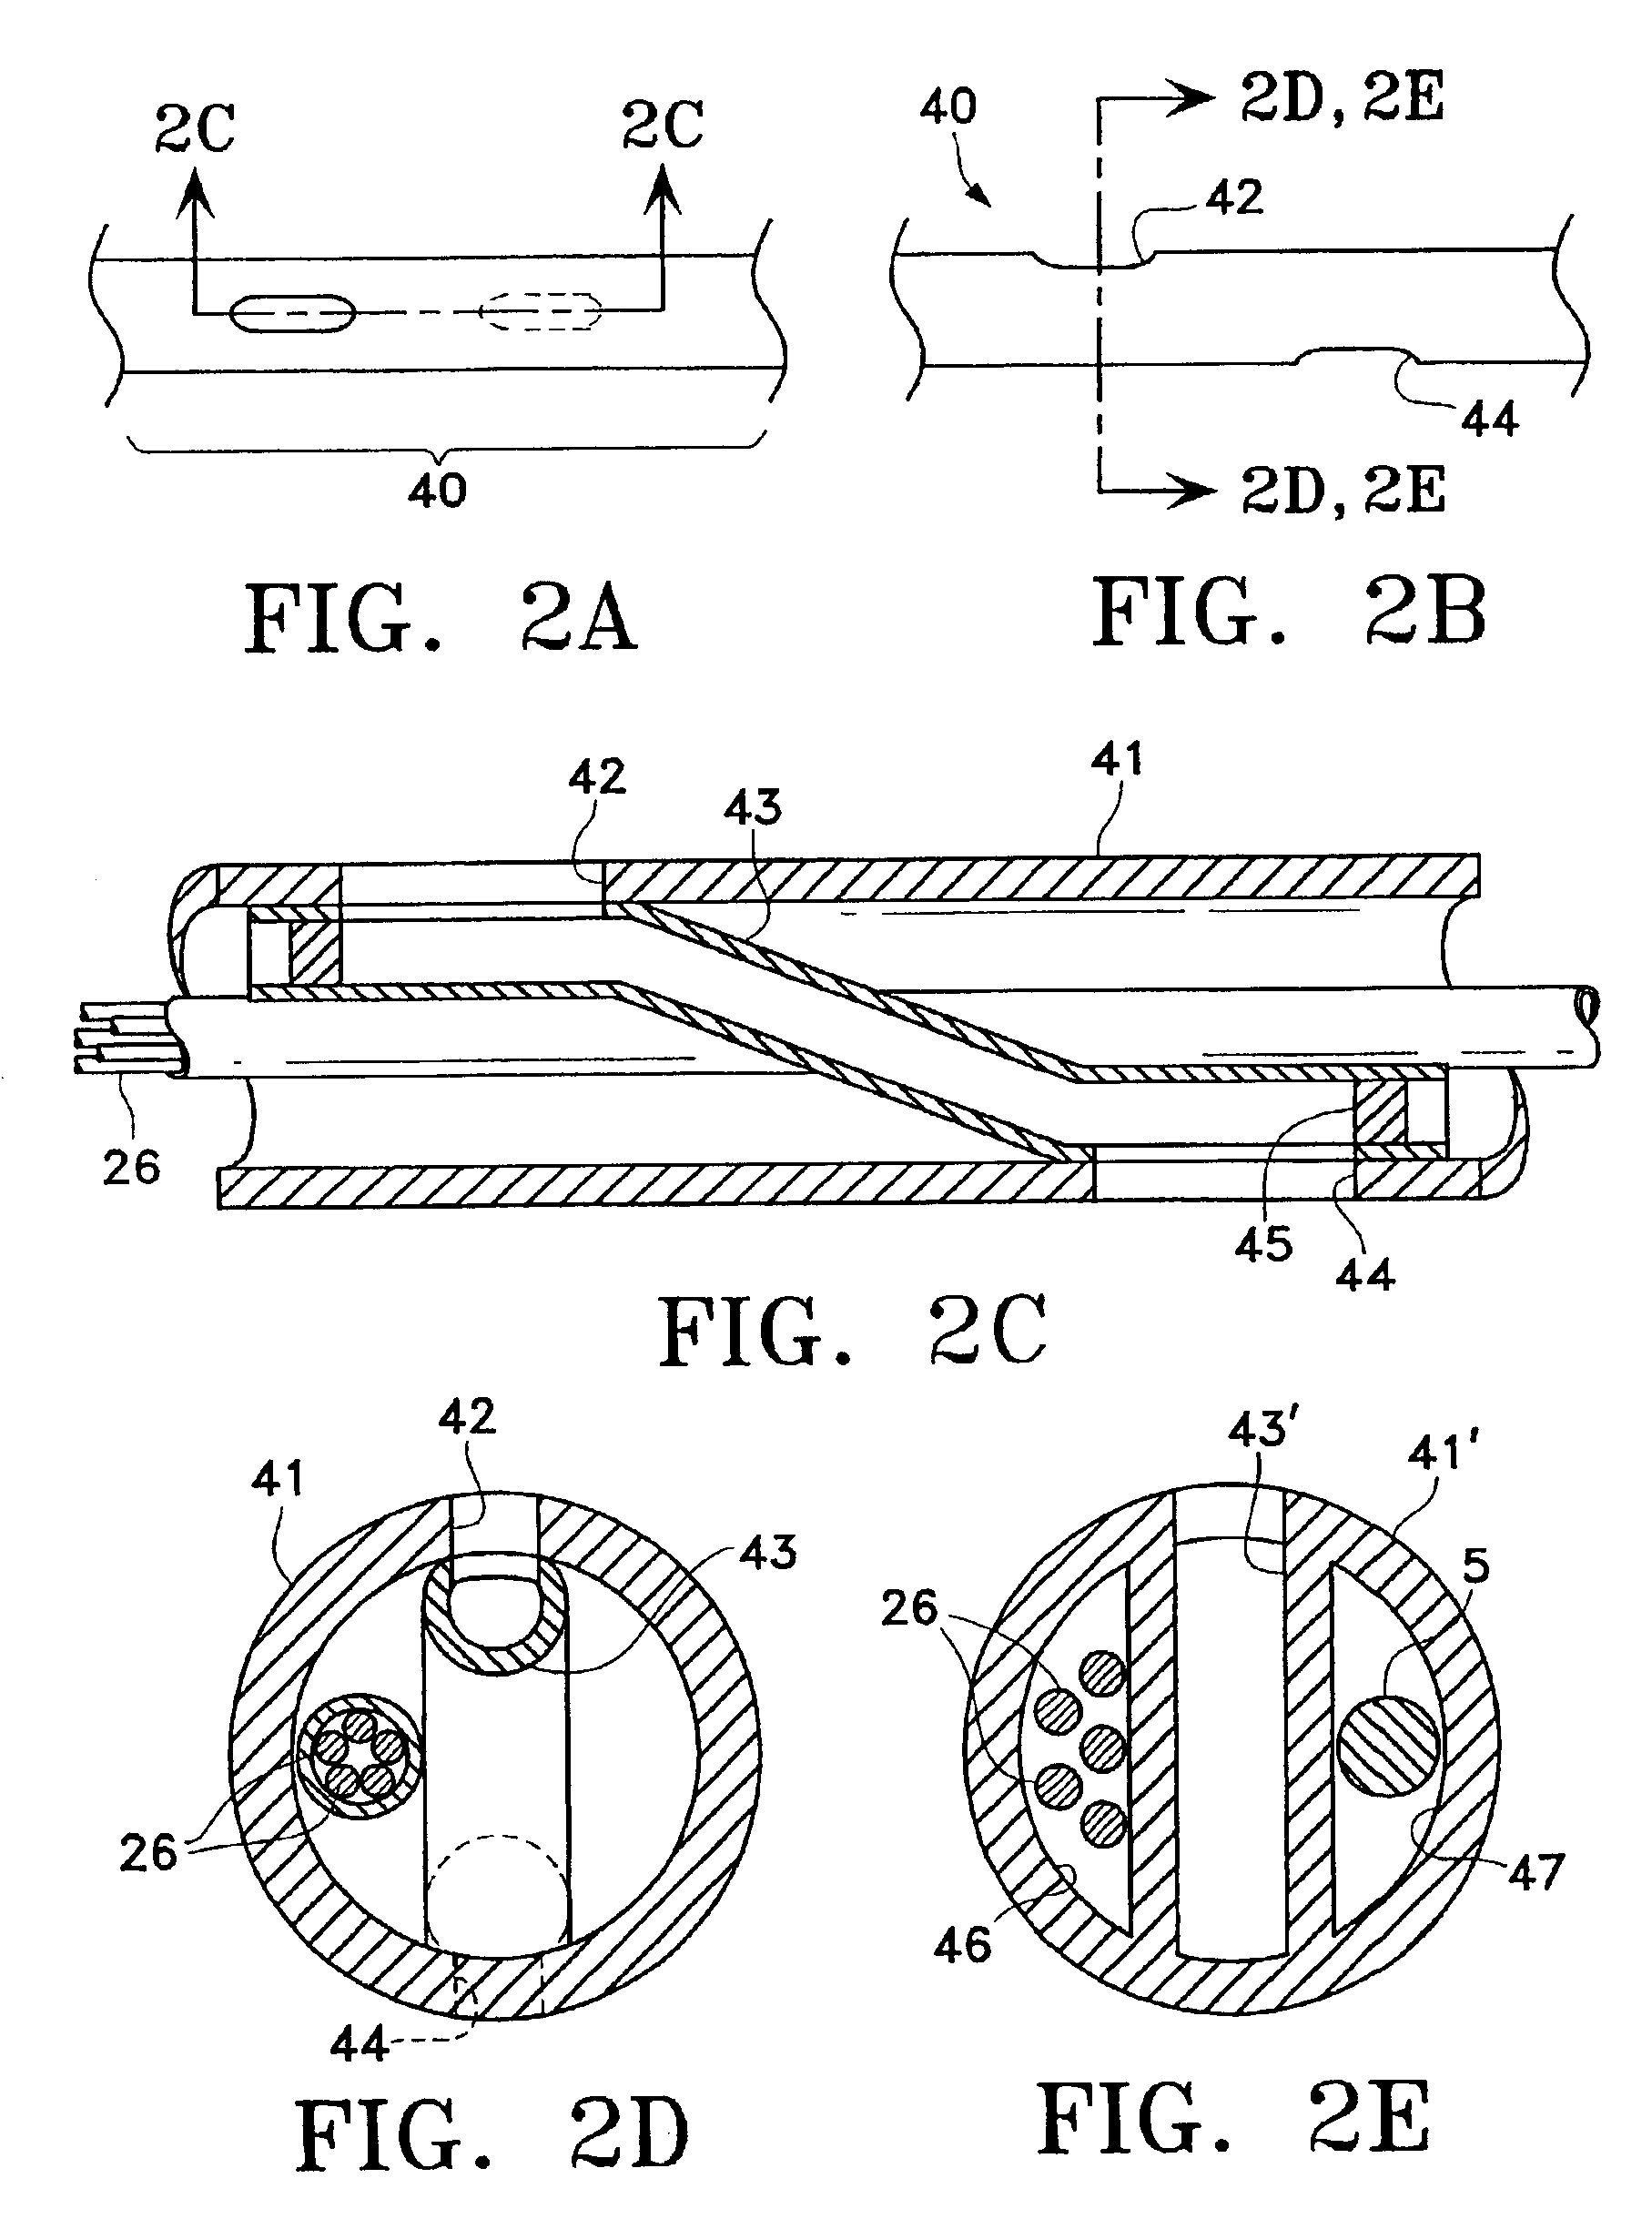 Tissue ablation device and method of use